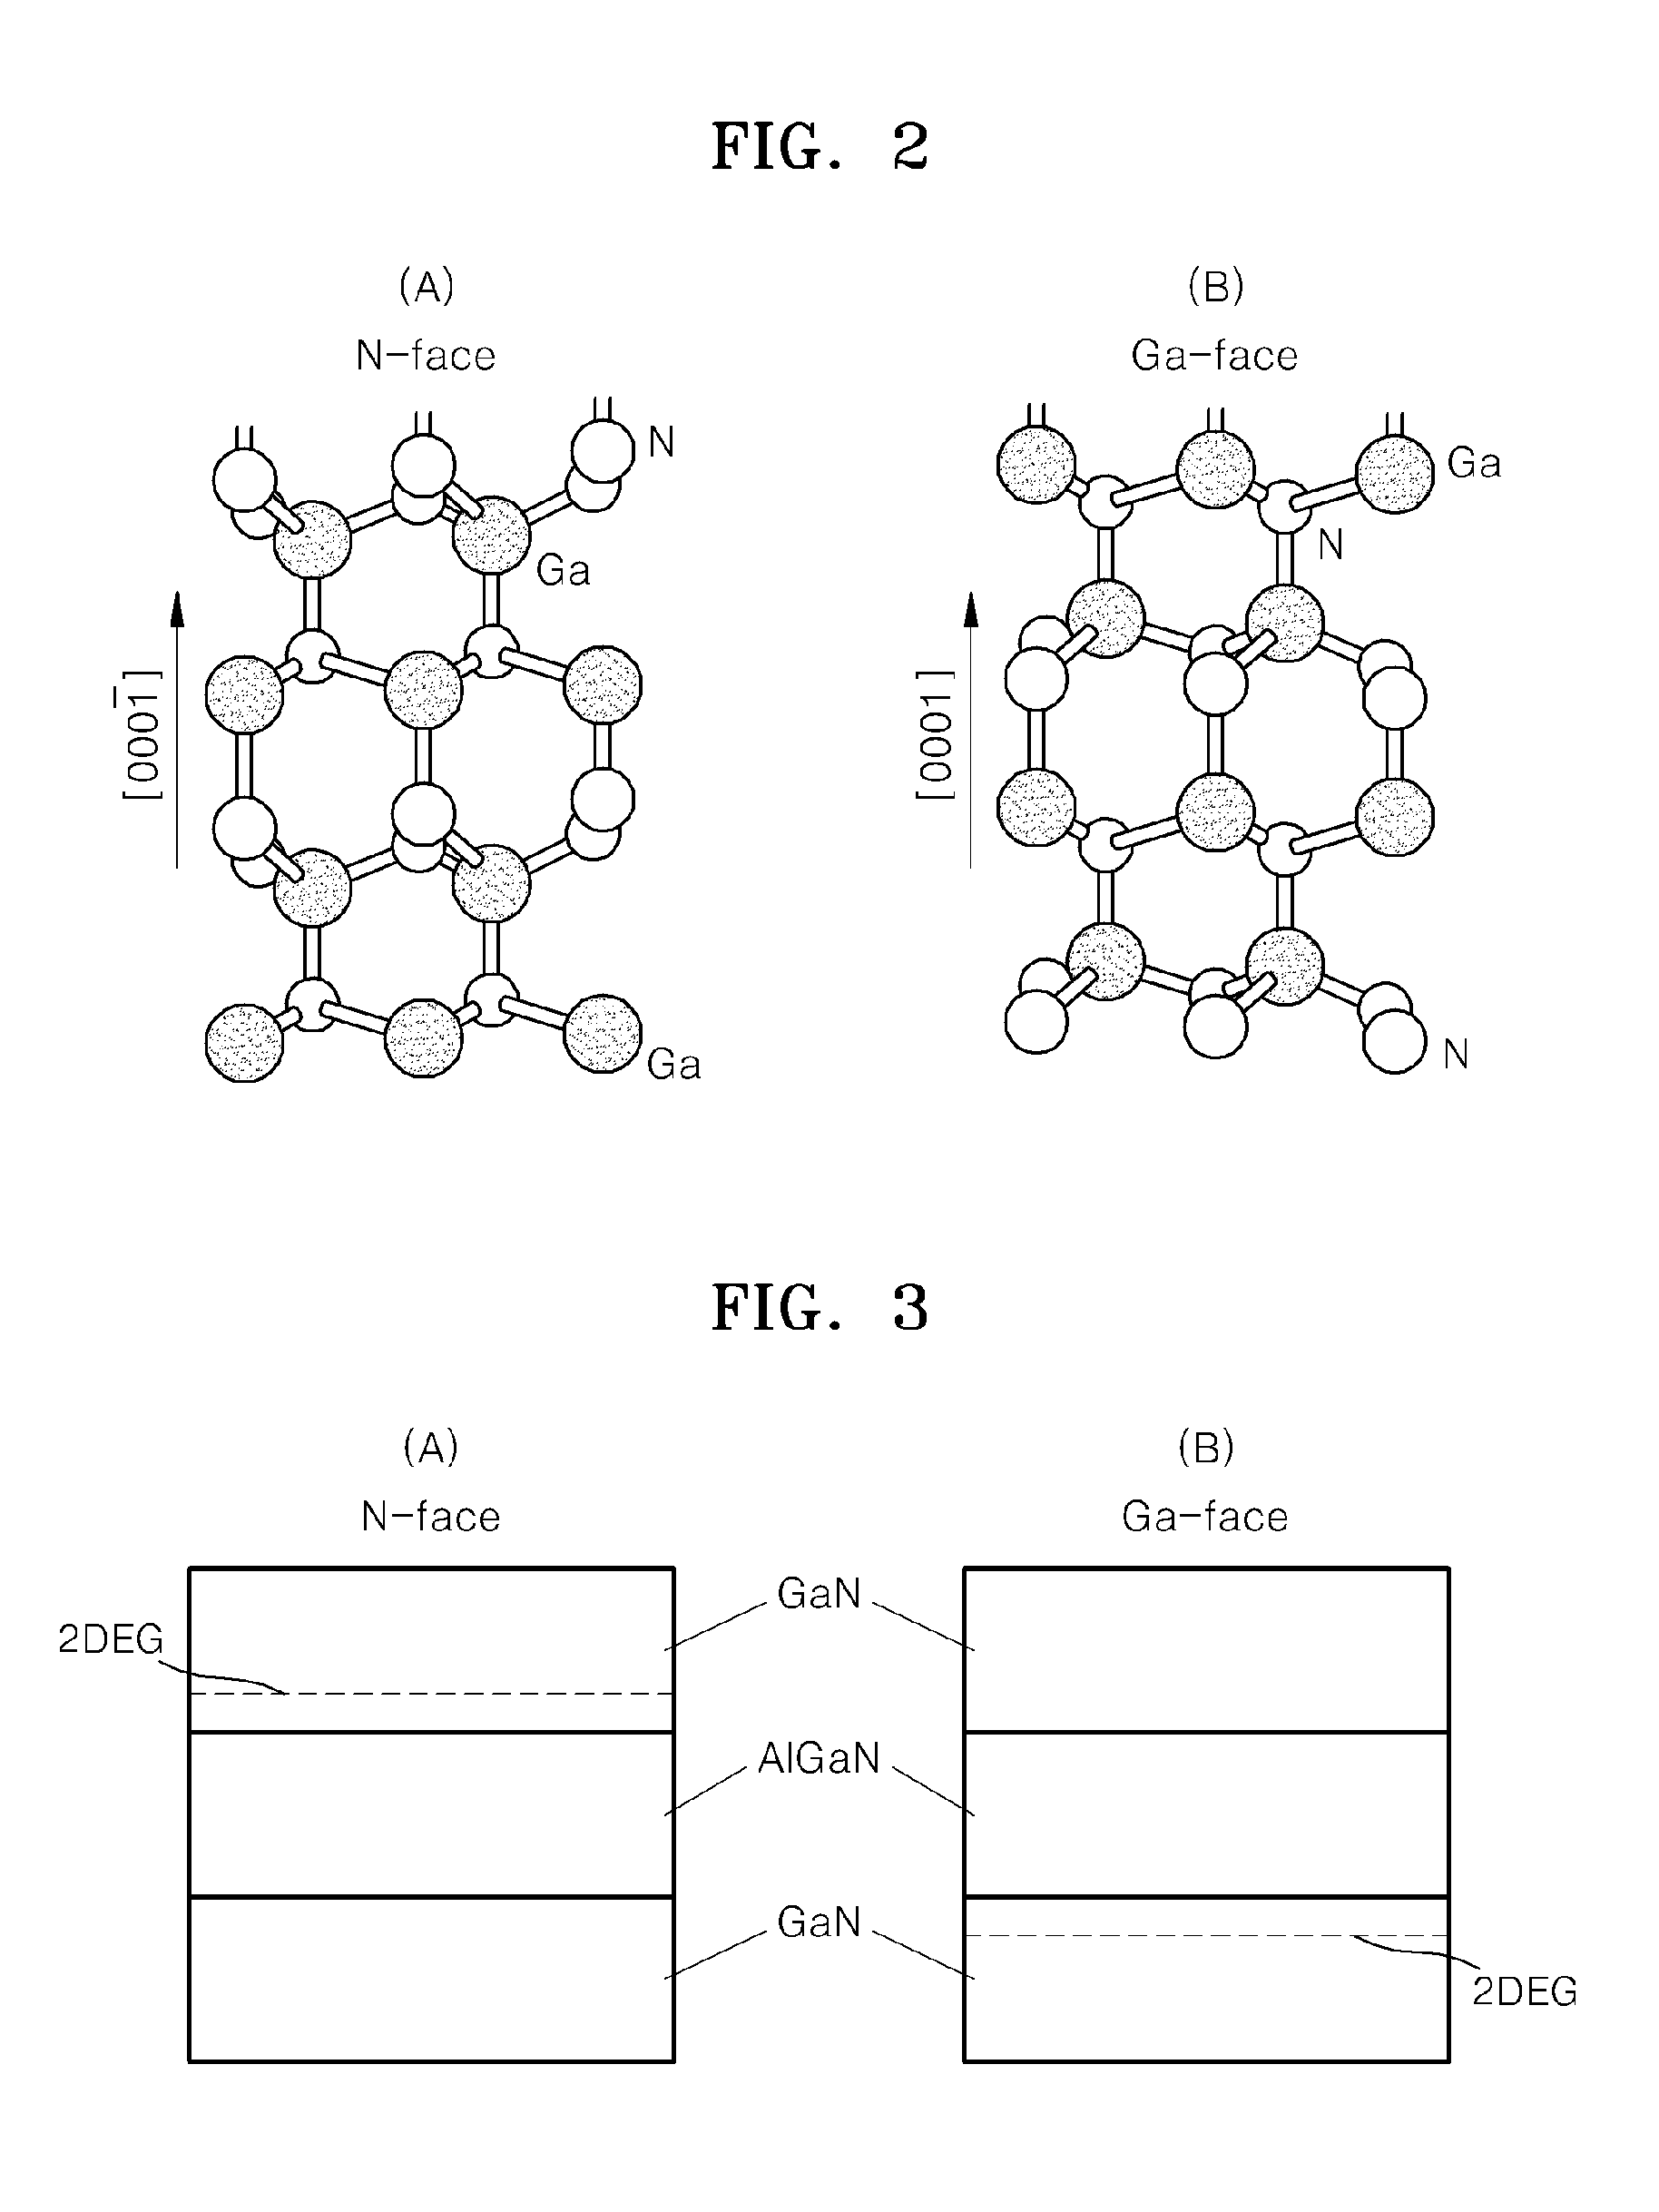 Gallium nitride based semiconductor devices and methods of manufacturing the same